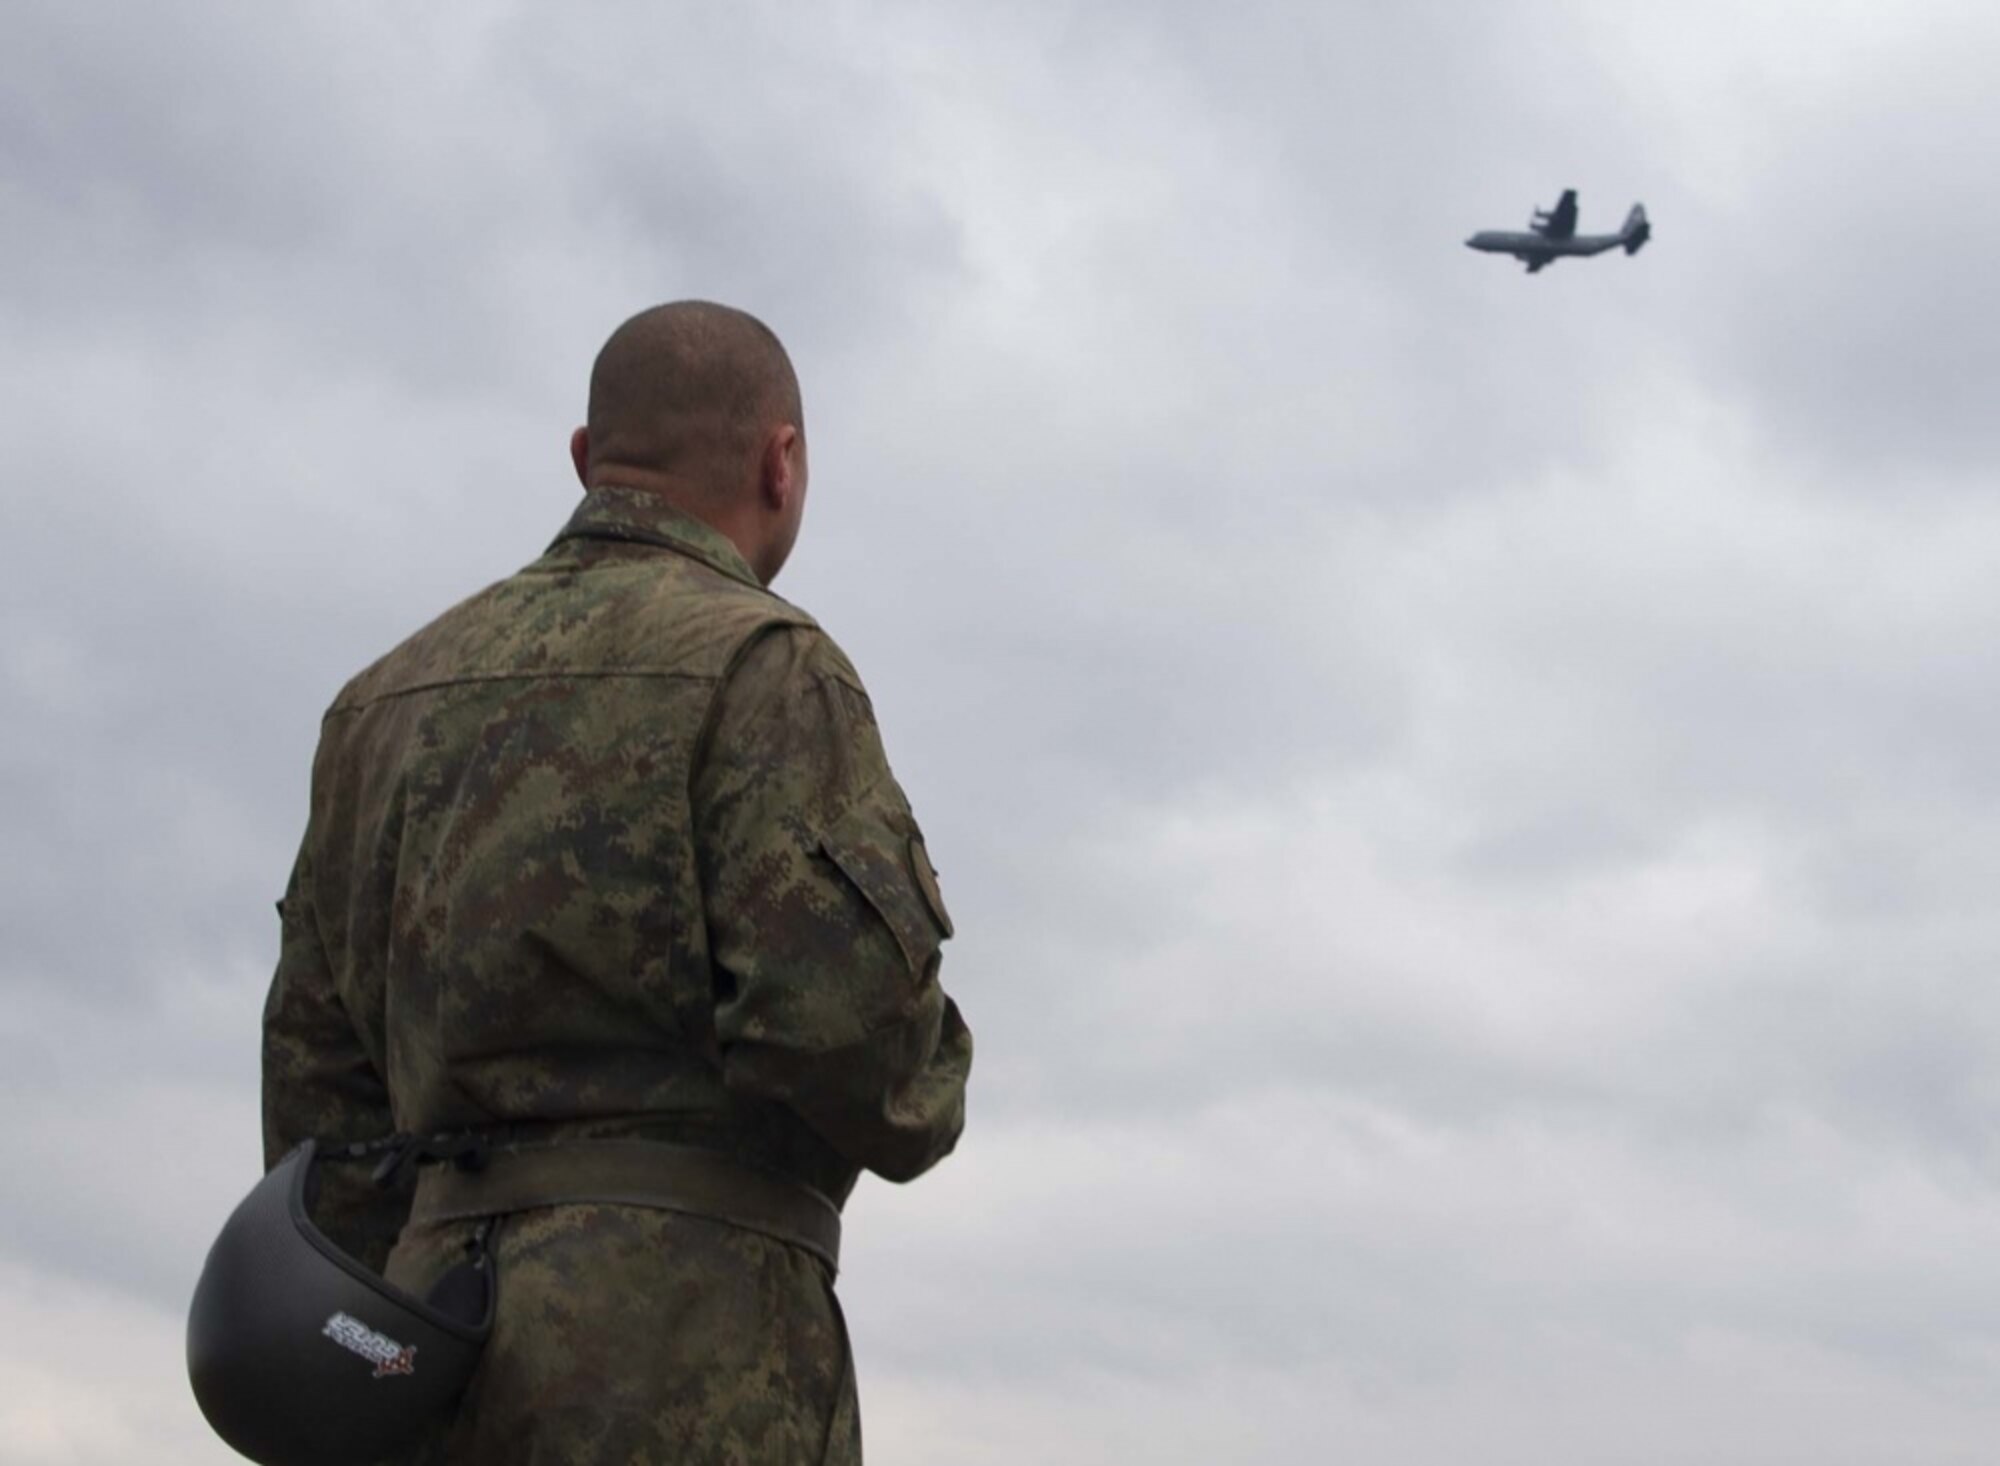 A Serbian jumper observes a C-130J assigned to the 37th Airlift Squadron after landing in Kovin, Serbia on November 16, 2017. Serbian and U.S. paratroopers jumped together in Exercise Double Eagle, a bi-lateral airborne insertion exercise designed to allow U.S. and Serbian forces to work together in areas of mutual interest in securing regional security and peace.